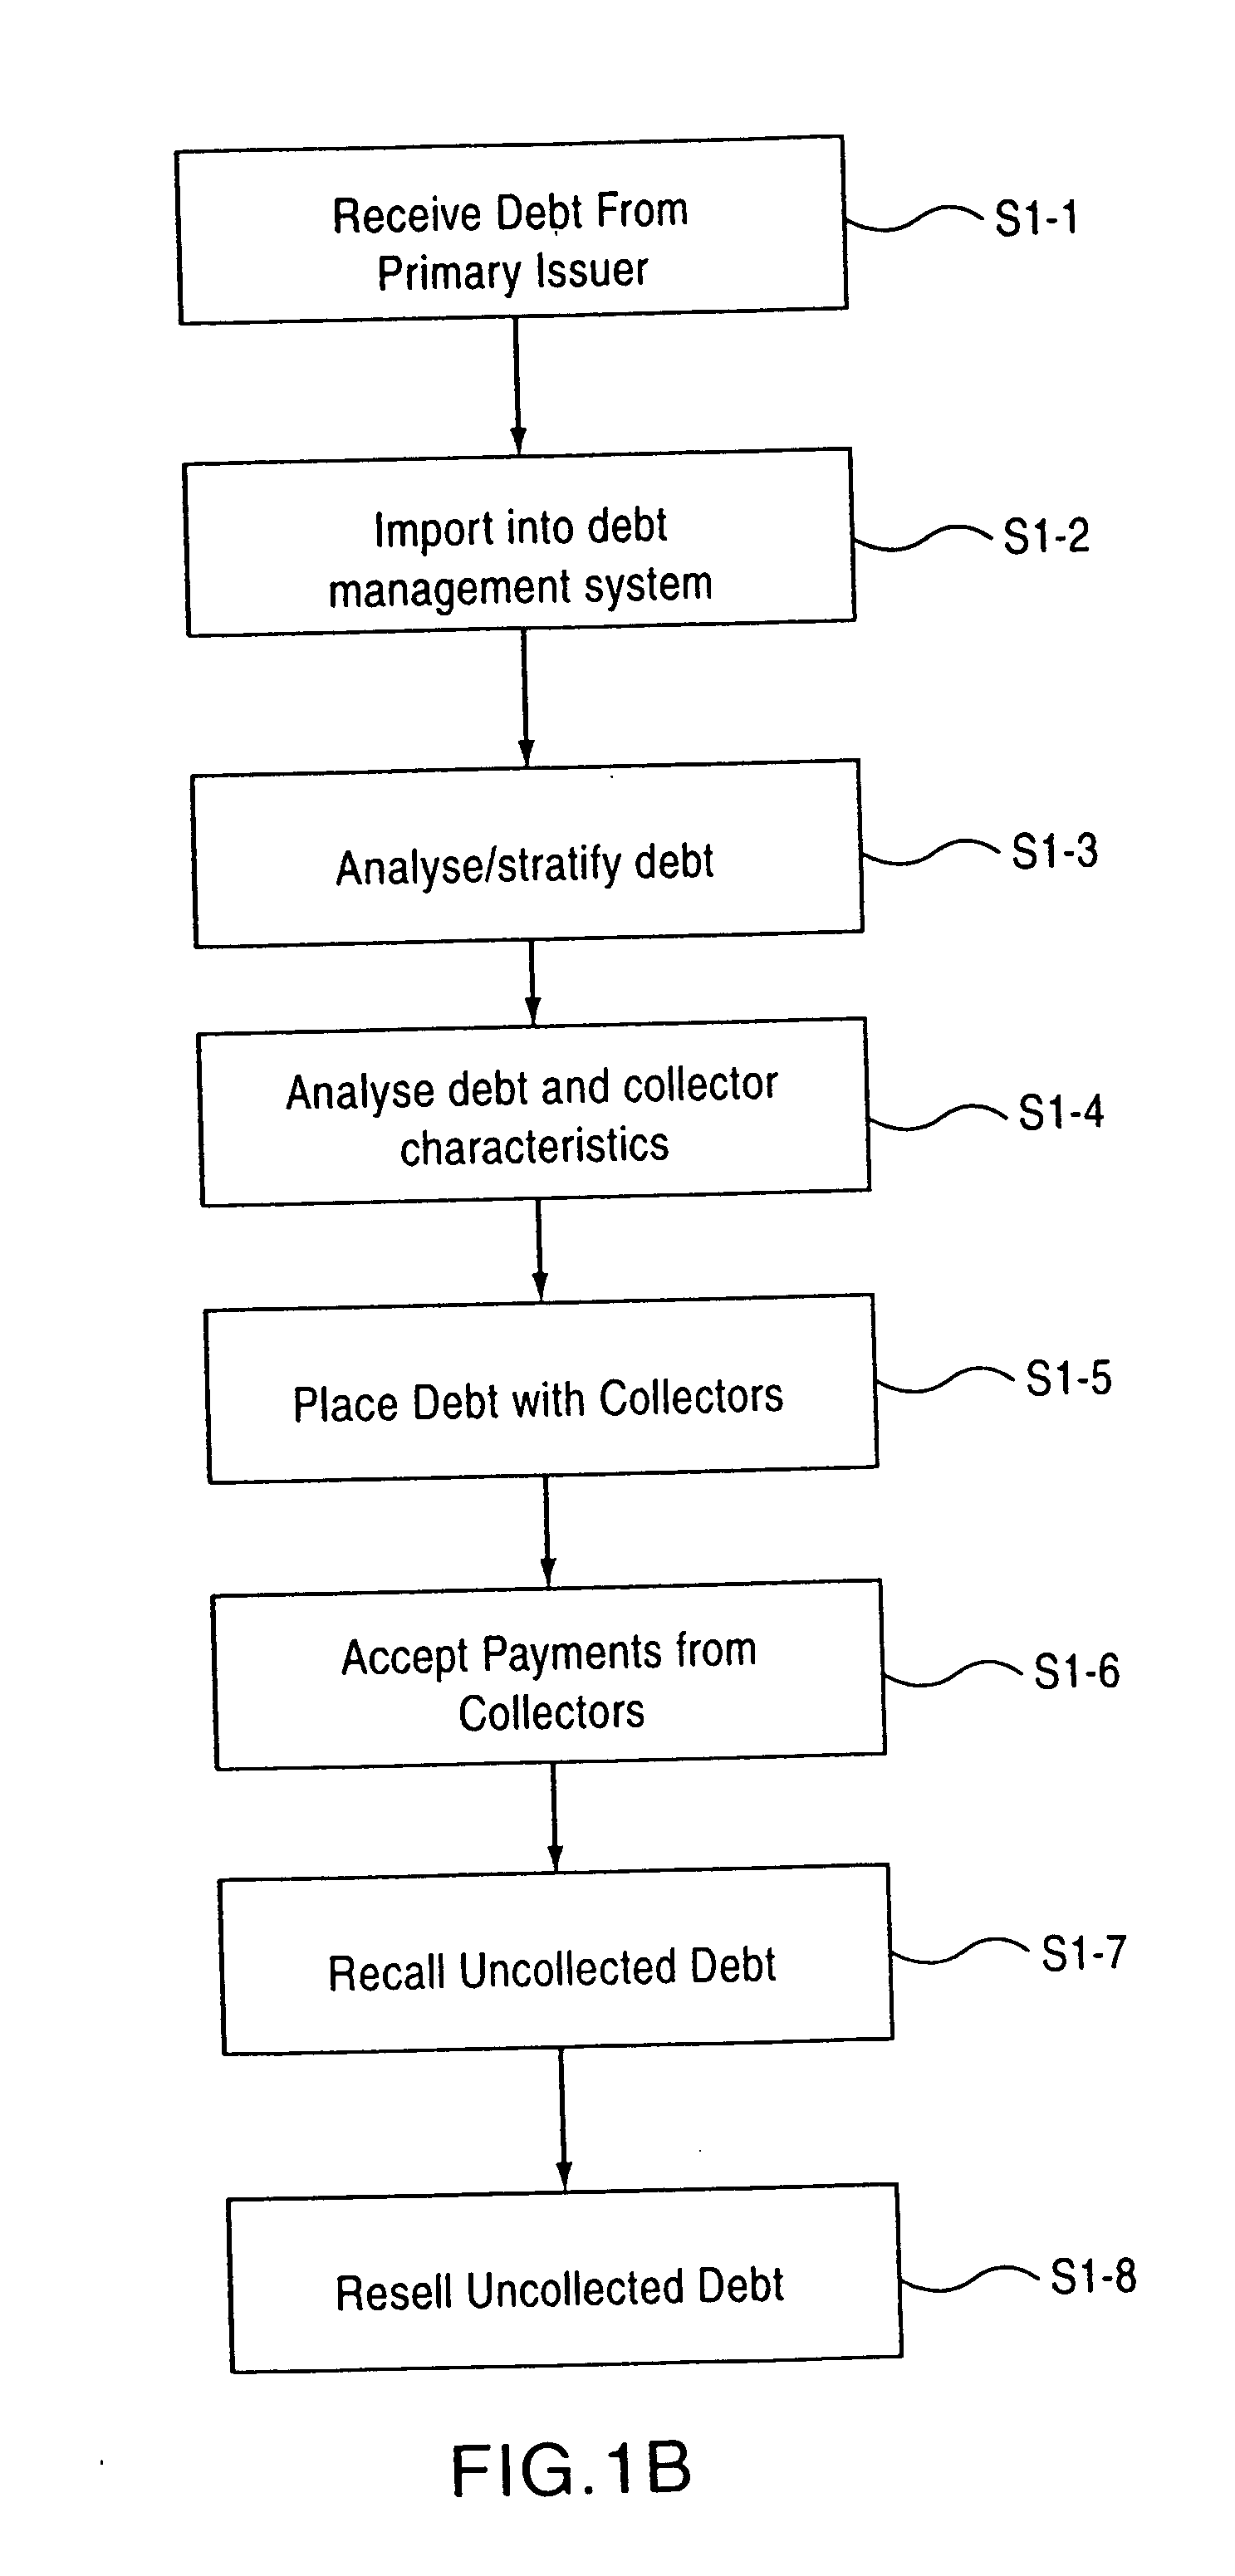 Systems and methods for acquiring, managing, placing, collecting and reselling debt